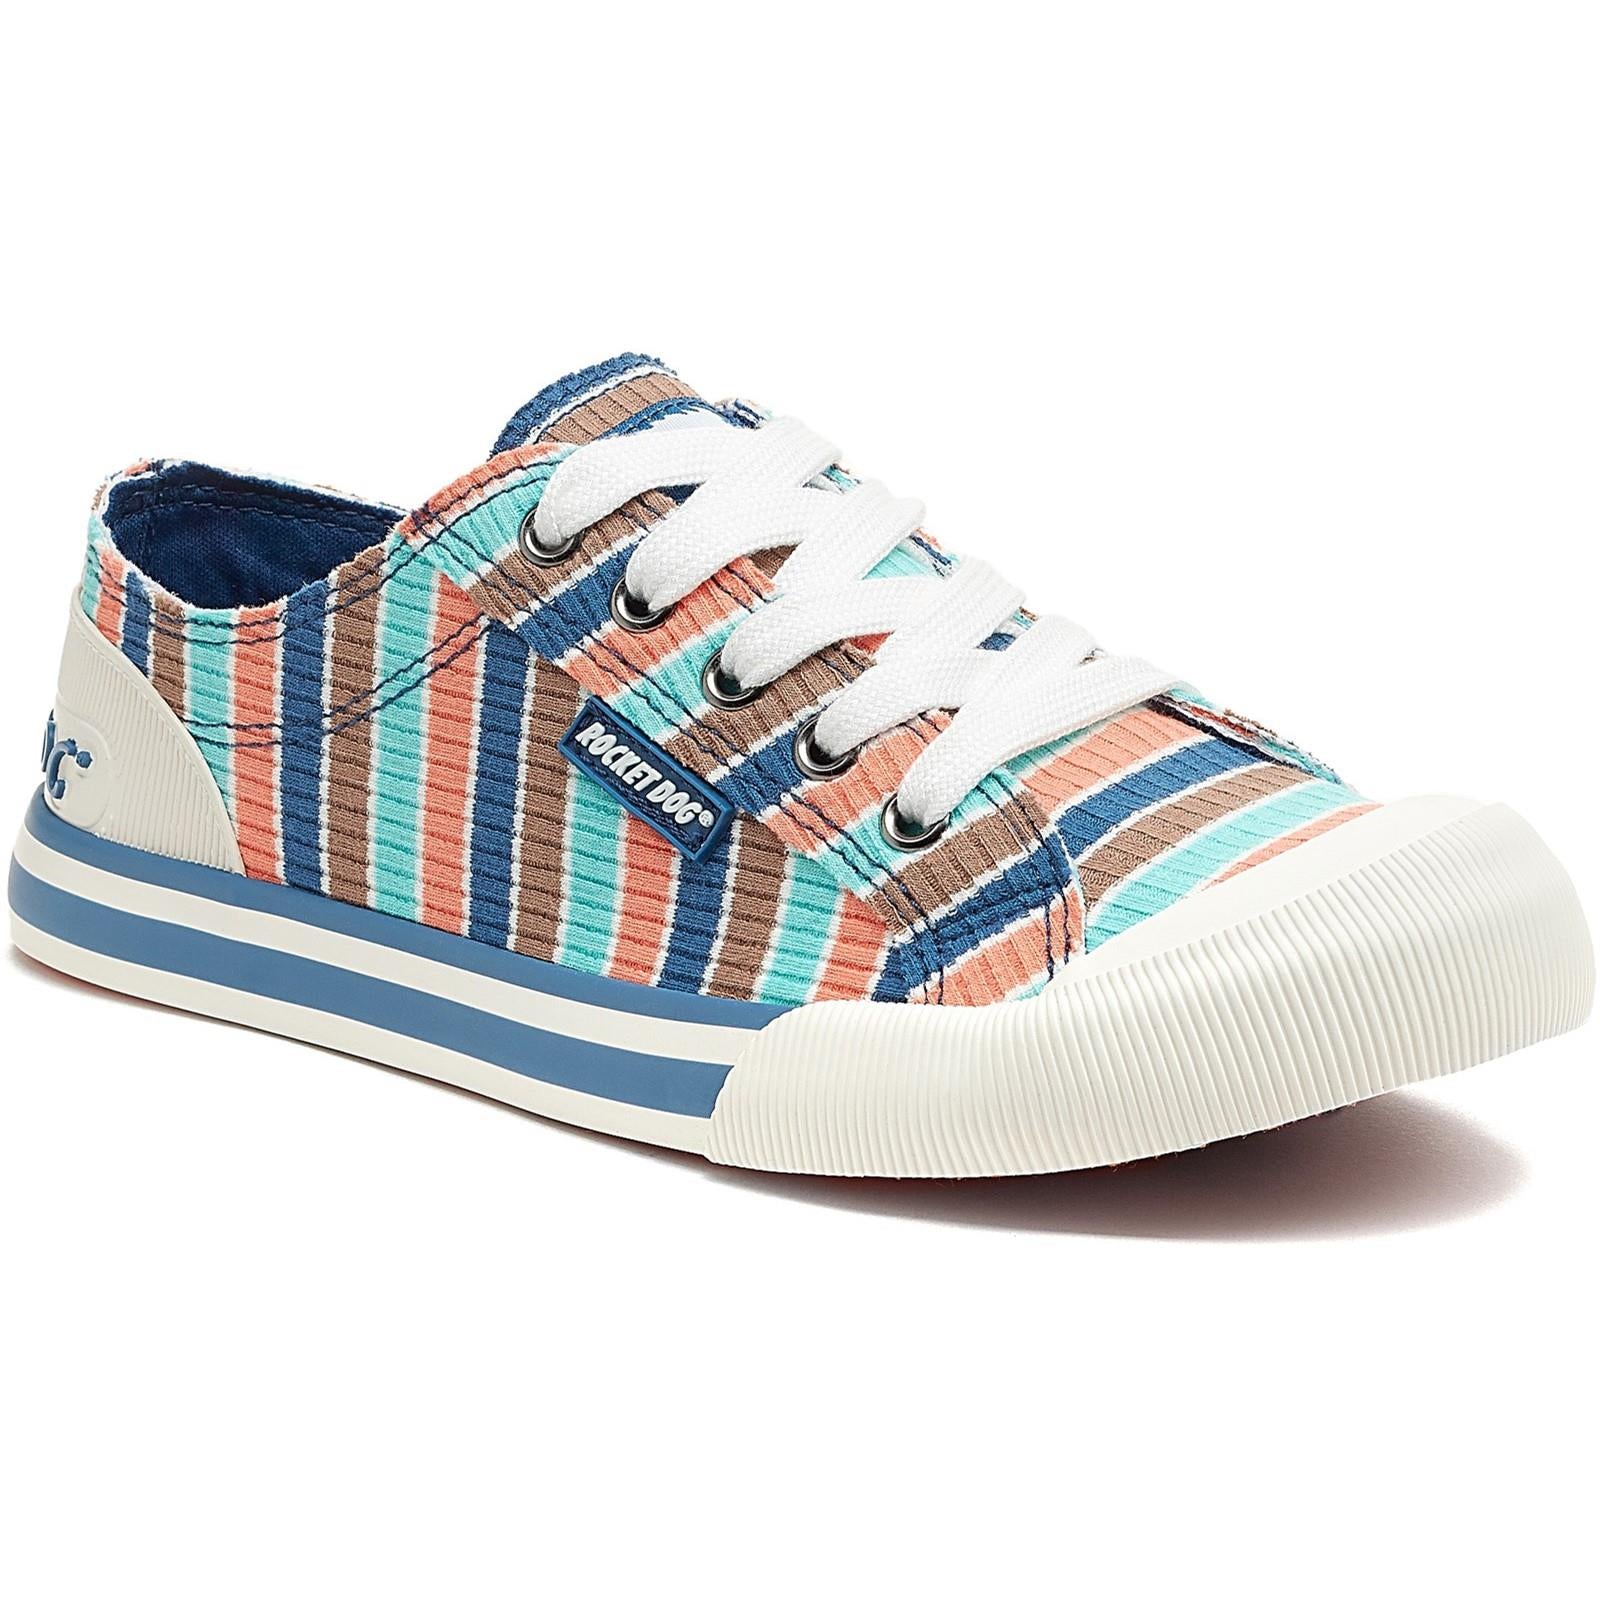 Rocket Dog Jazzin Aster ladies lace up plimsoll trainers shoes